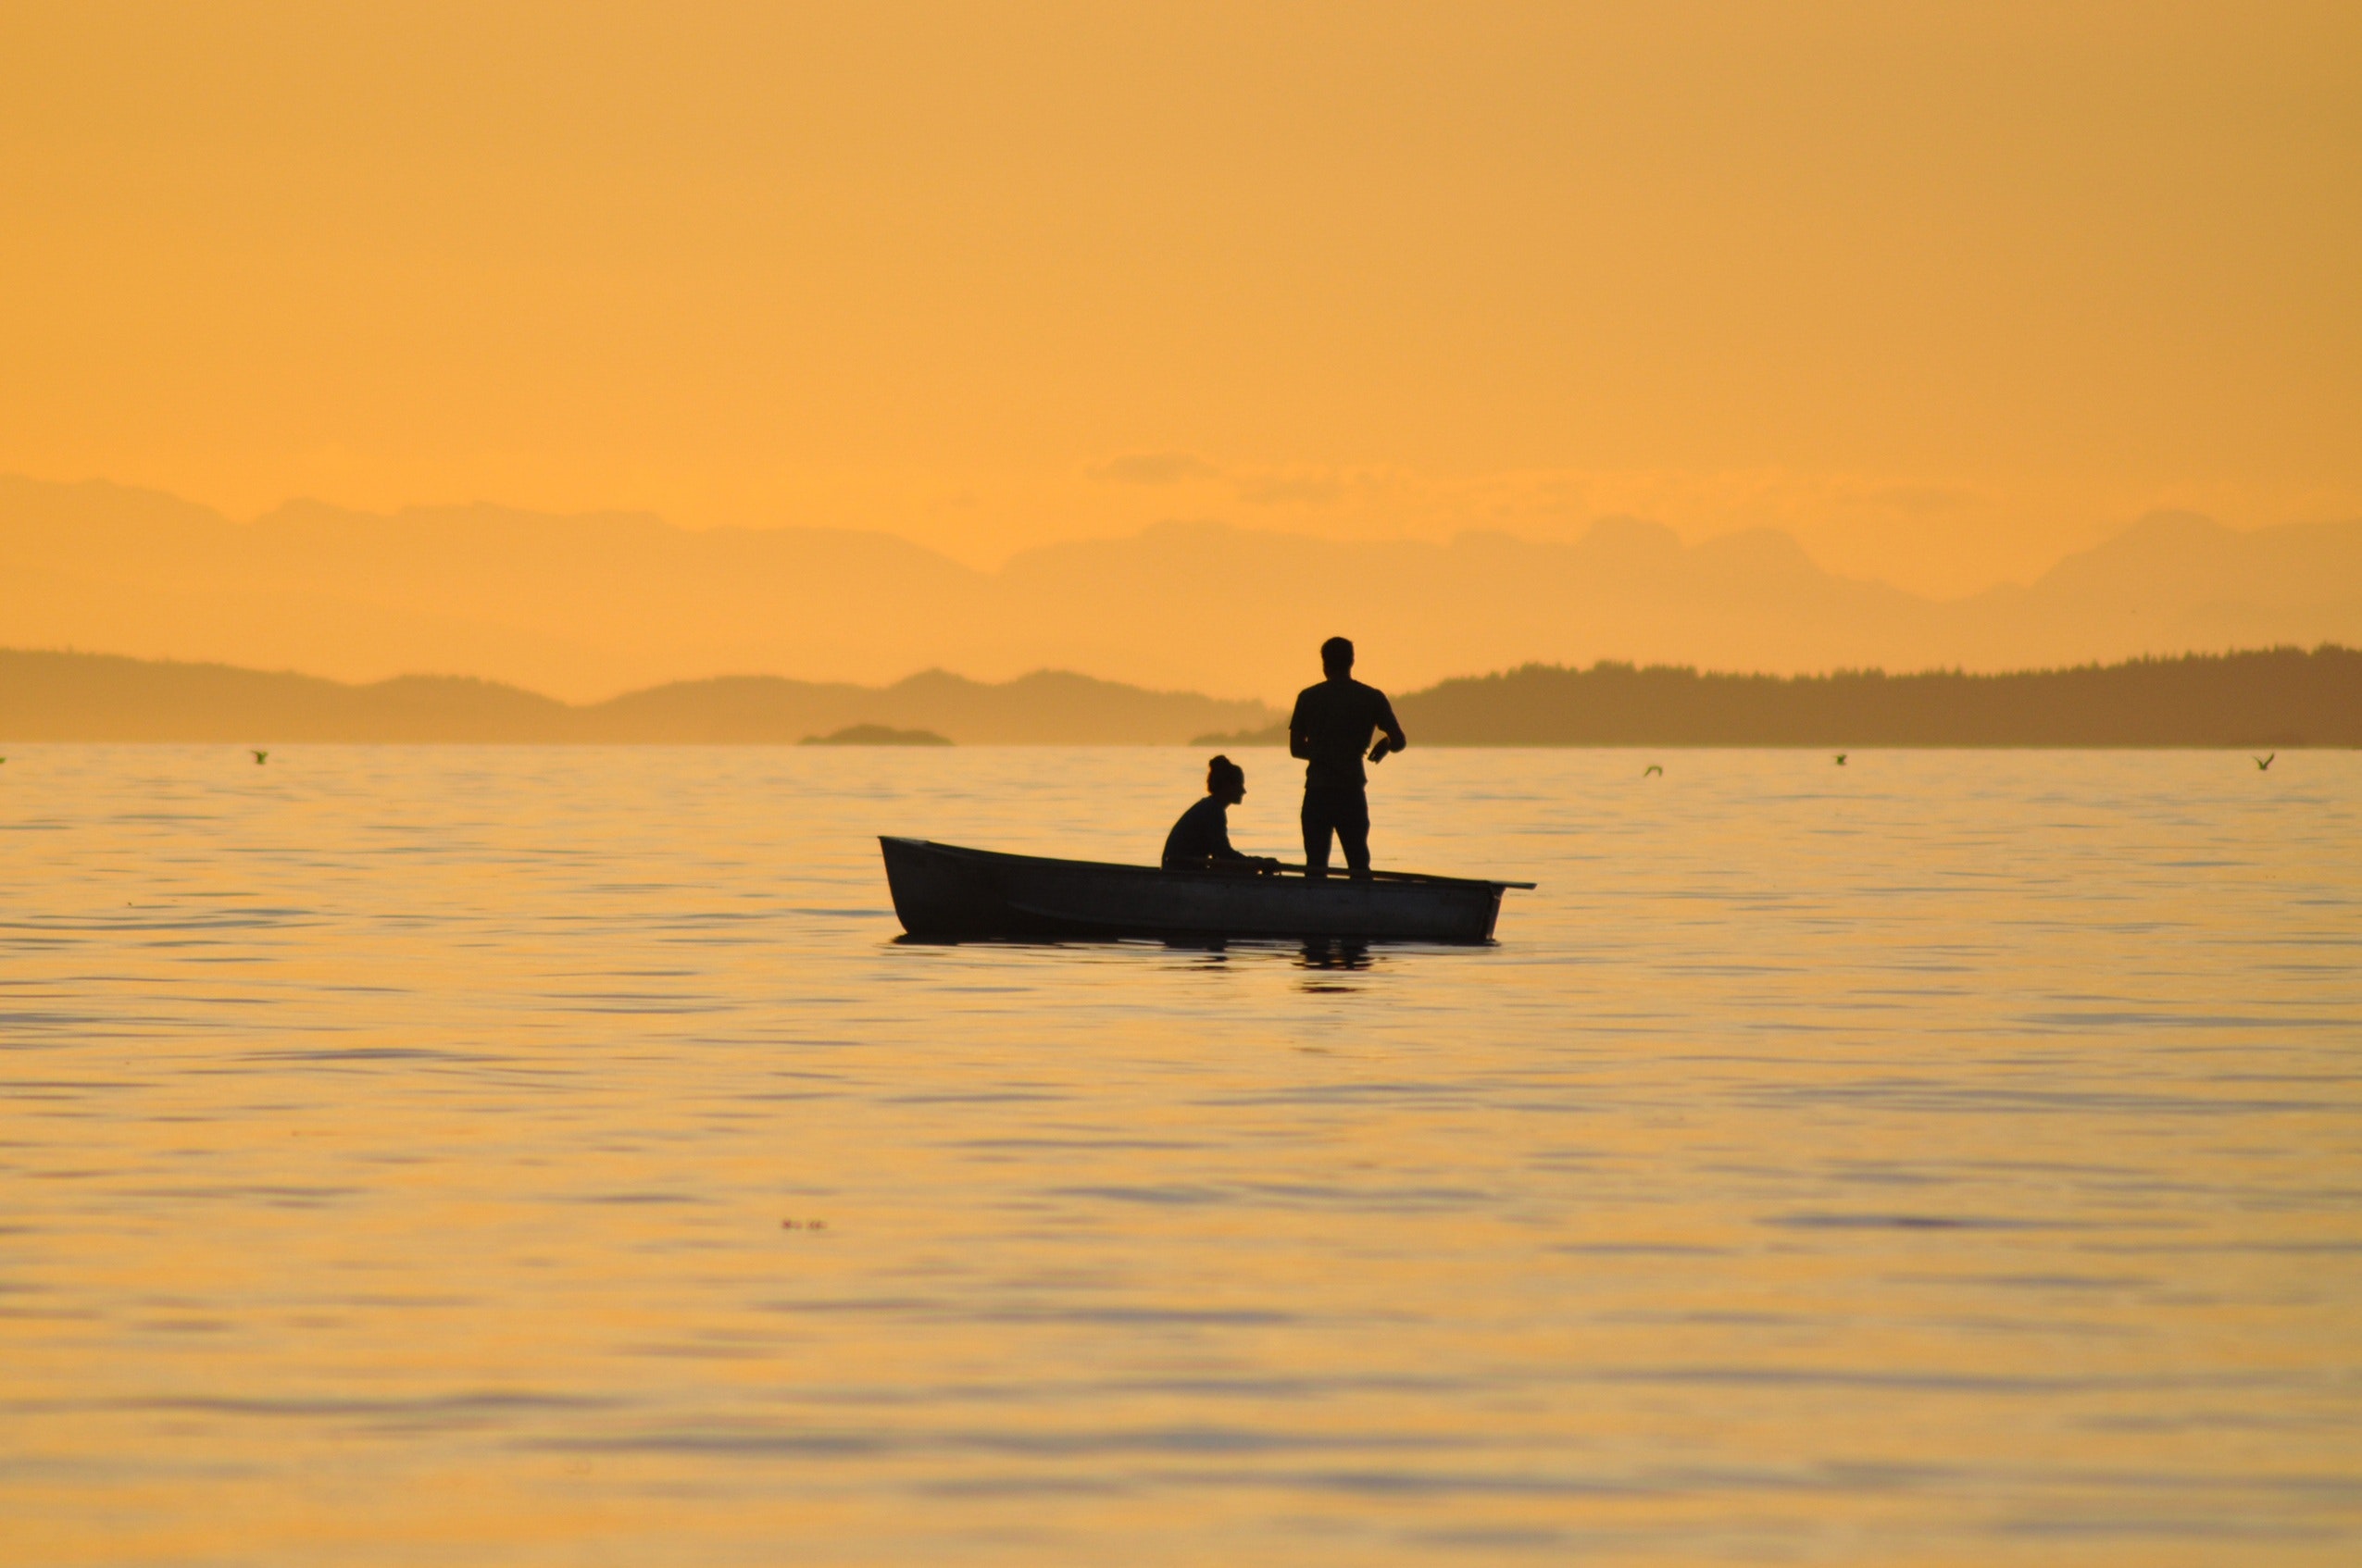 Two people in a boat on the water at sunset.